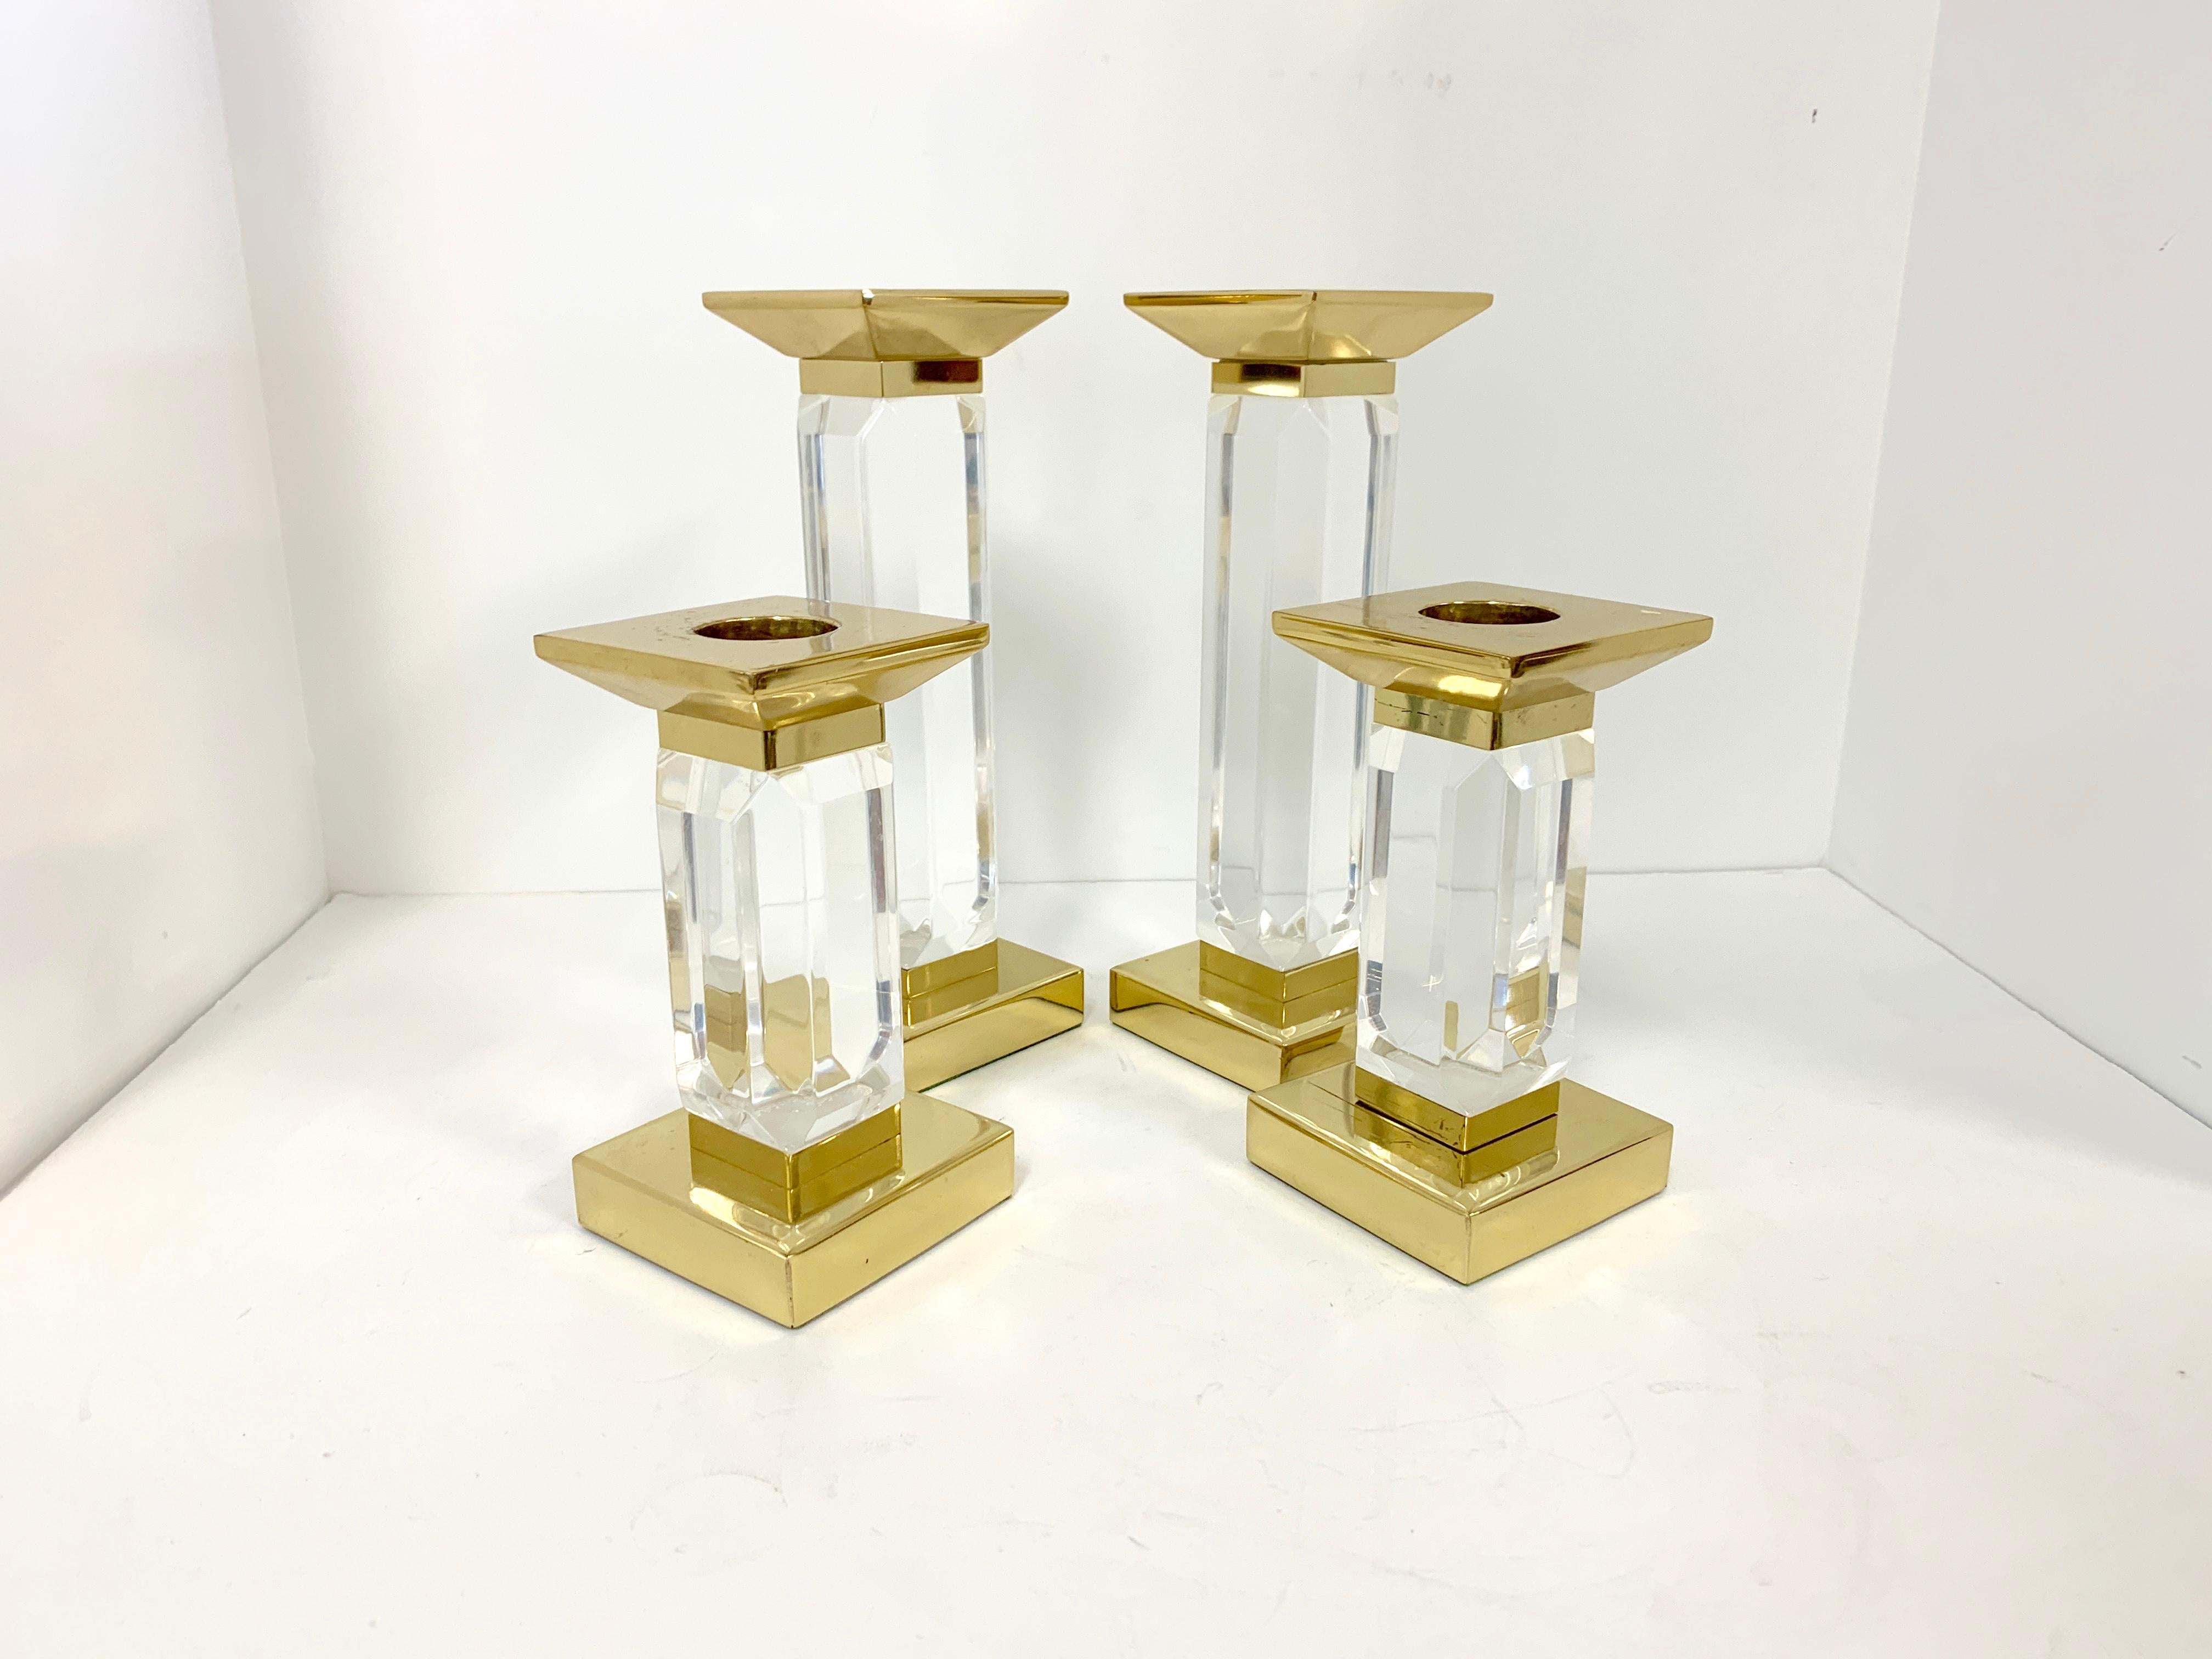 Two pairs of Charles Hollis Jones Lucite and brass candlesticks, candleholders. These are vintage midcentury pieces. They are in good age appropriate condition with some marks to the brass, wax residue from use and marks and some cloudiness from age